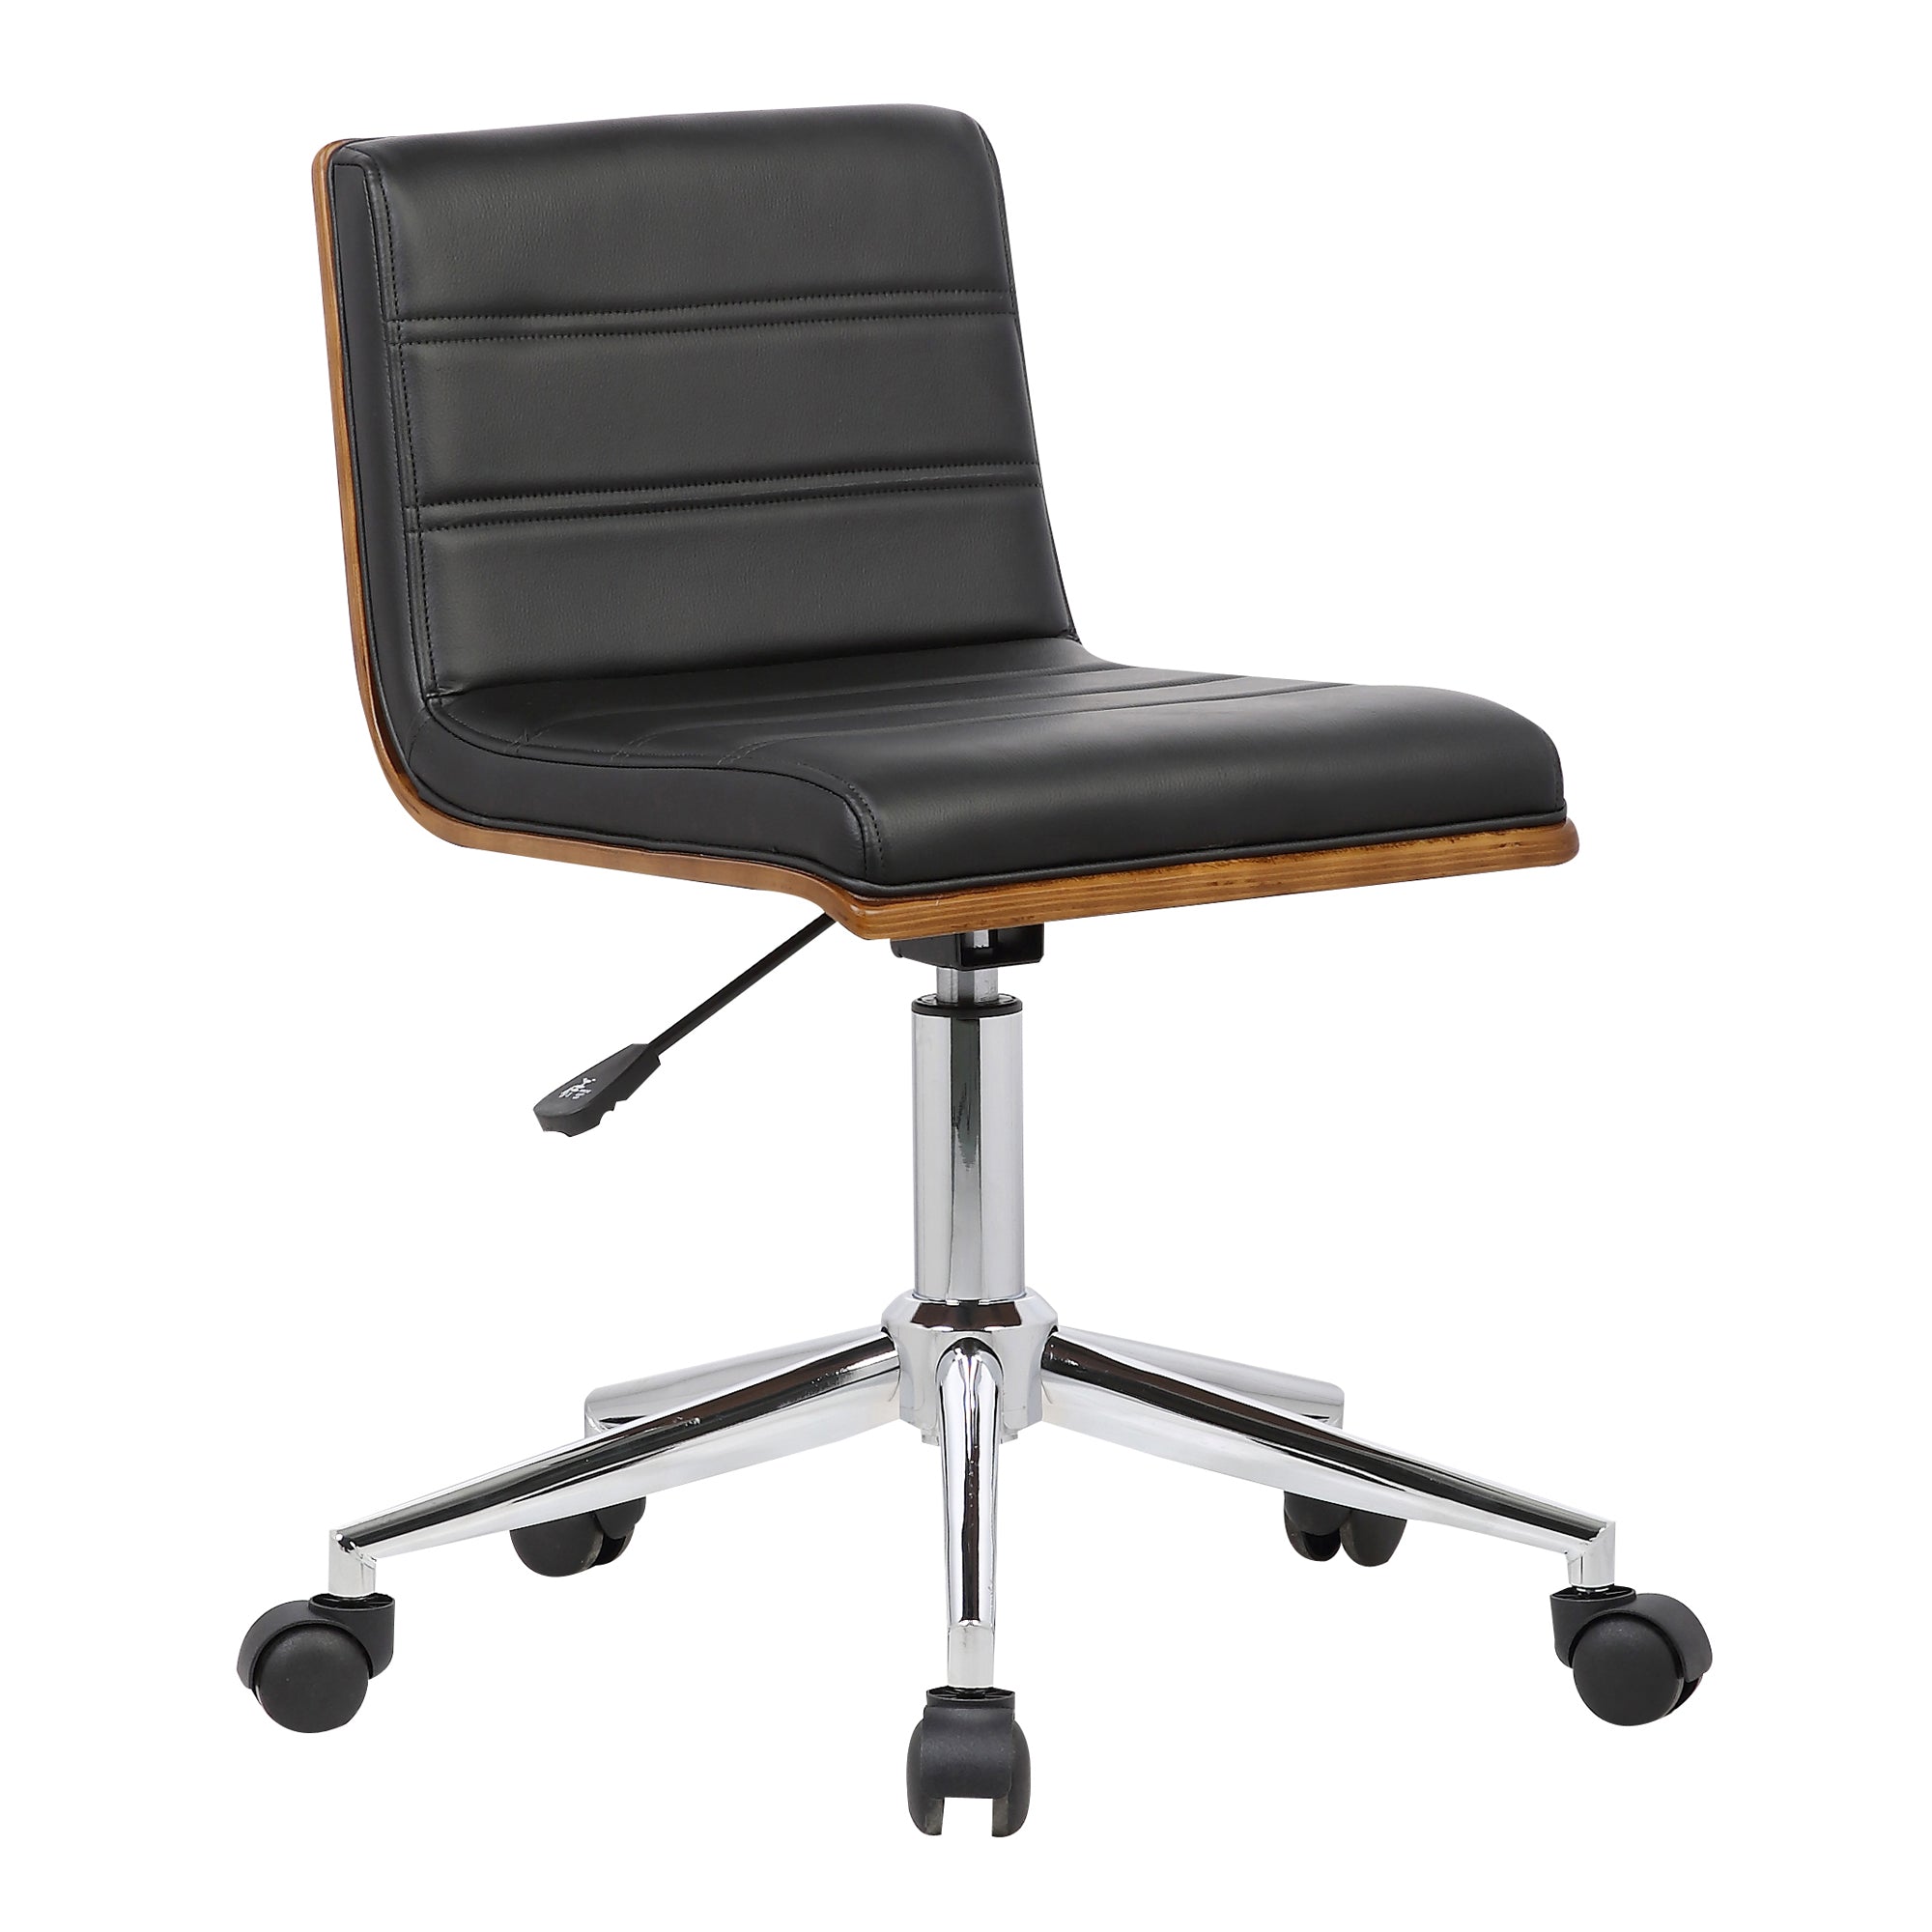 Armen Living Lcboofchblack Bowie Mid-century Office Chair In Chrome Finish With Black Faux Leather And Walnut Veneer Back